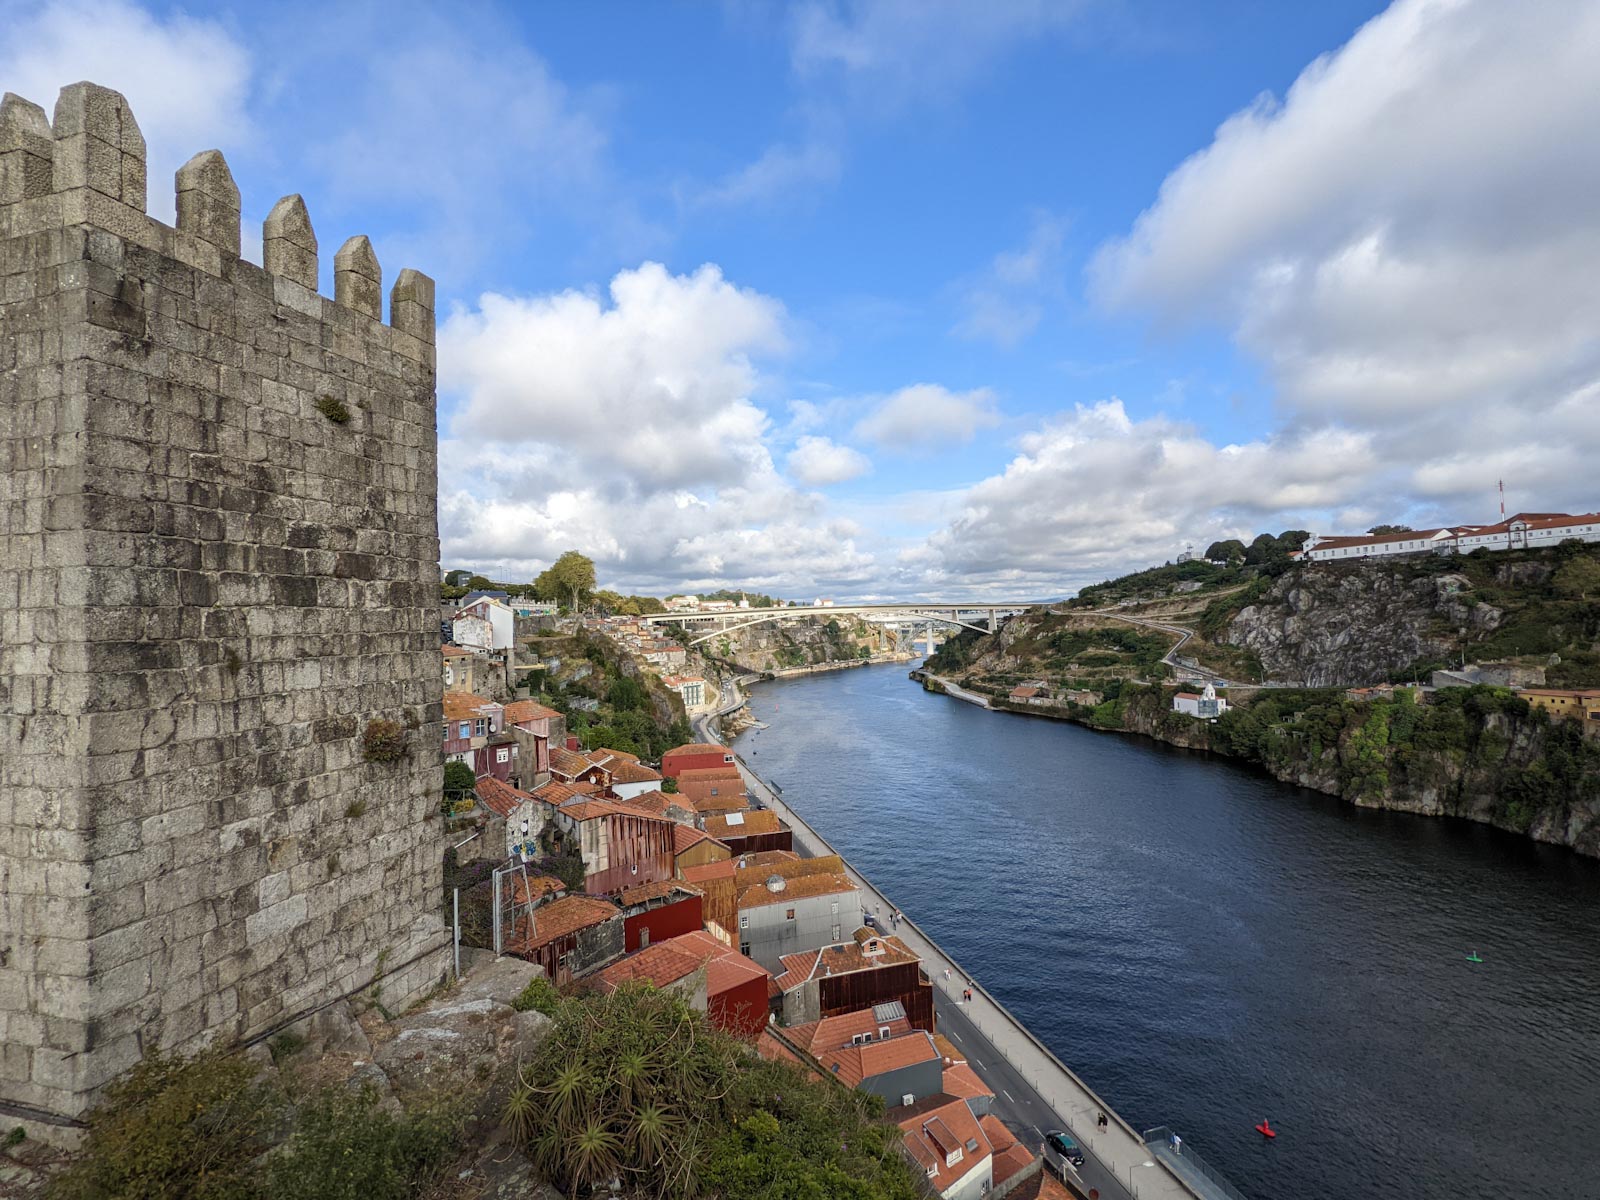 An old castle by the Rio Douro.